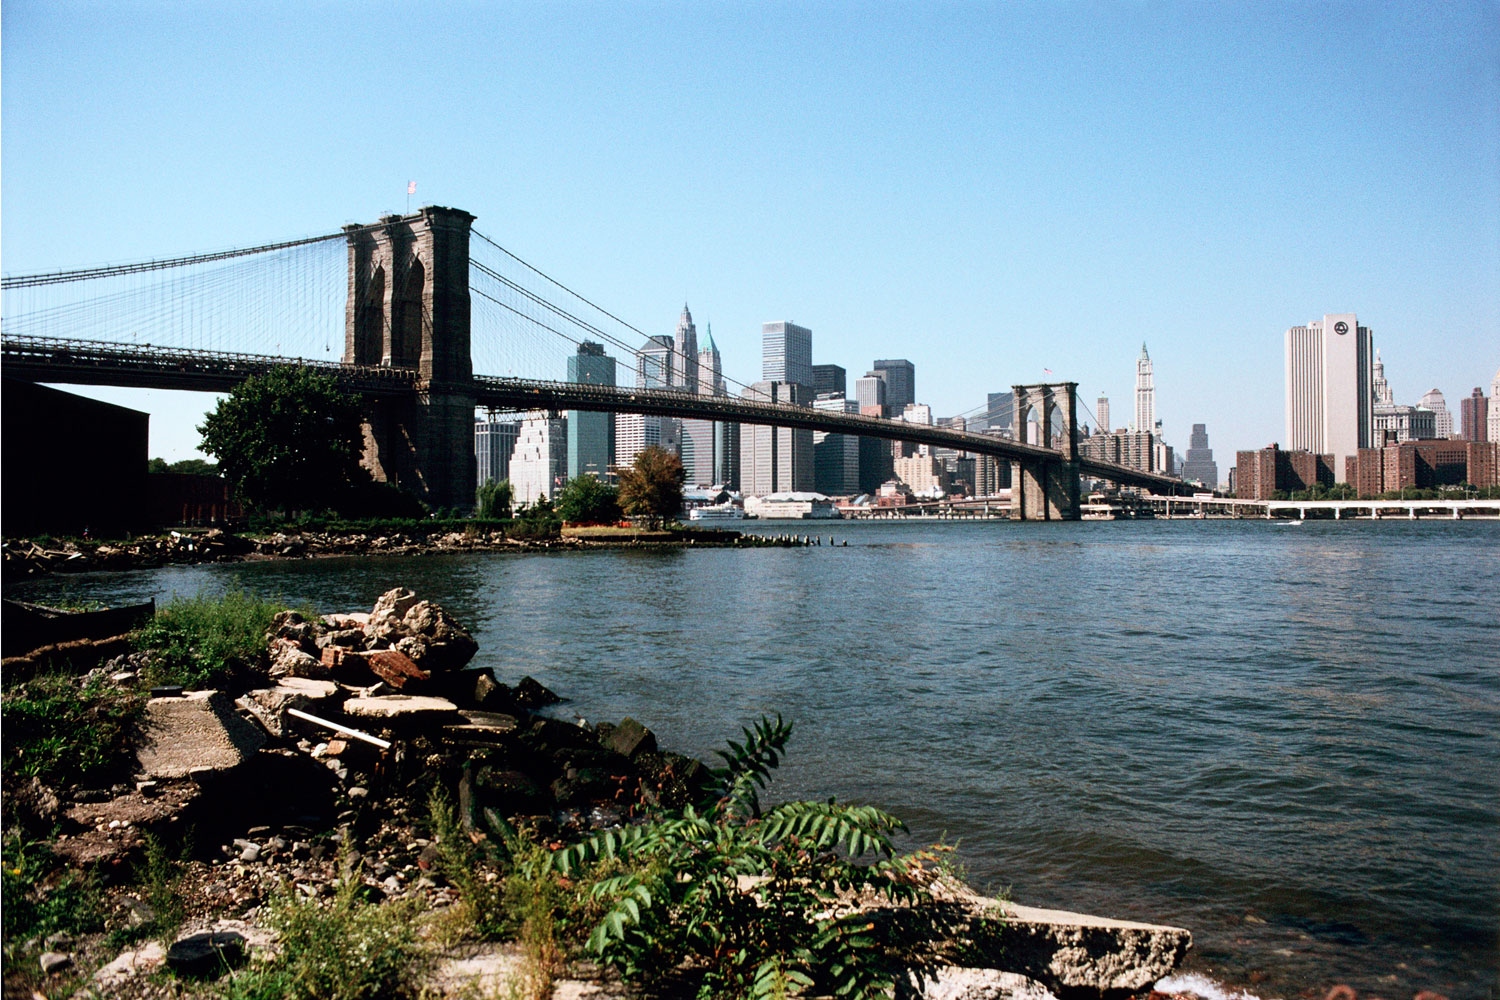 View from the foot of the Manhattan Bridge, Brooklyn, 2001.